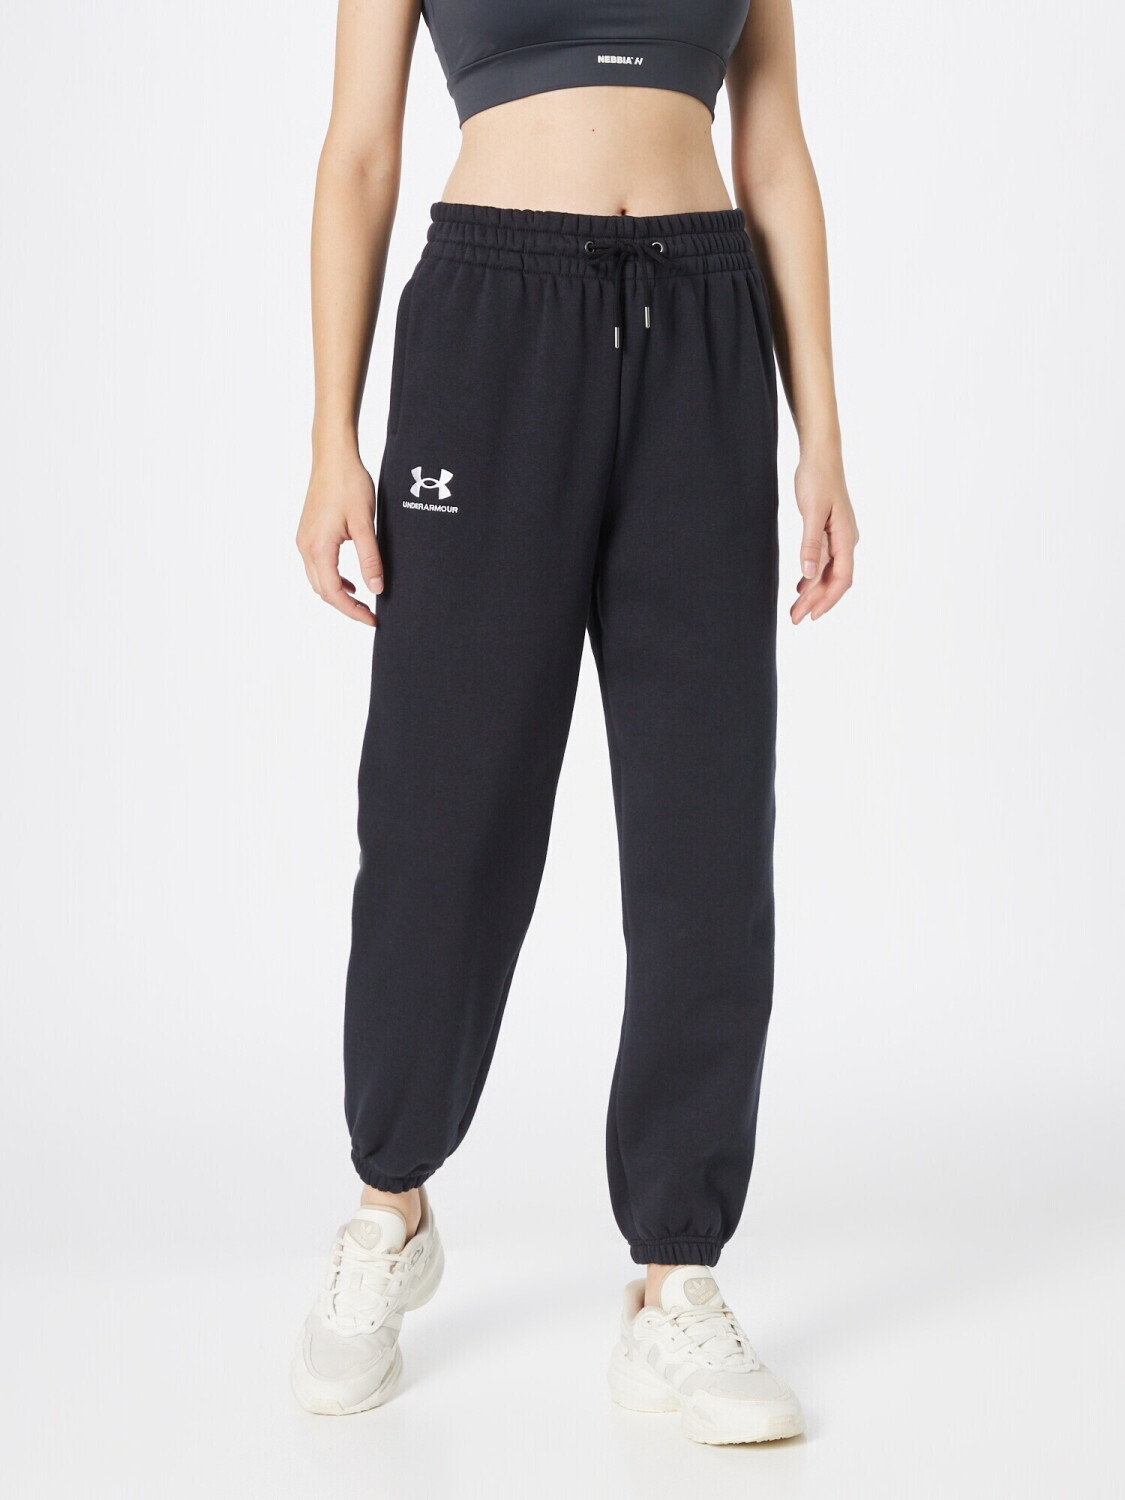 Buy Under Armour Essential Sweatpants black-white (1373034-001) from £42.49  (Today) – Best Deals on